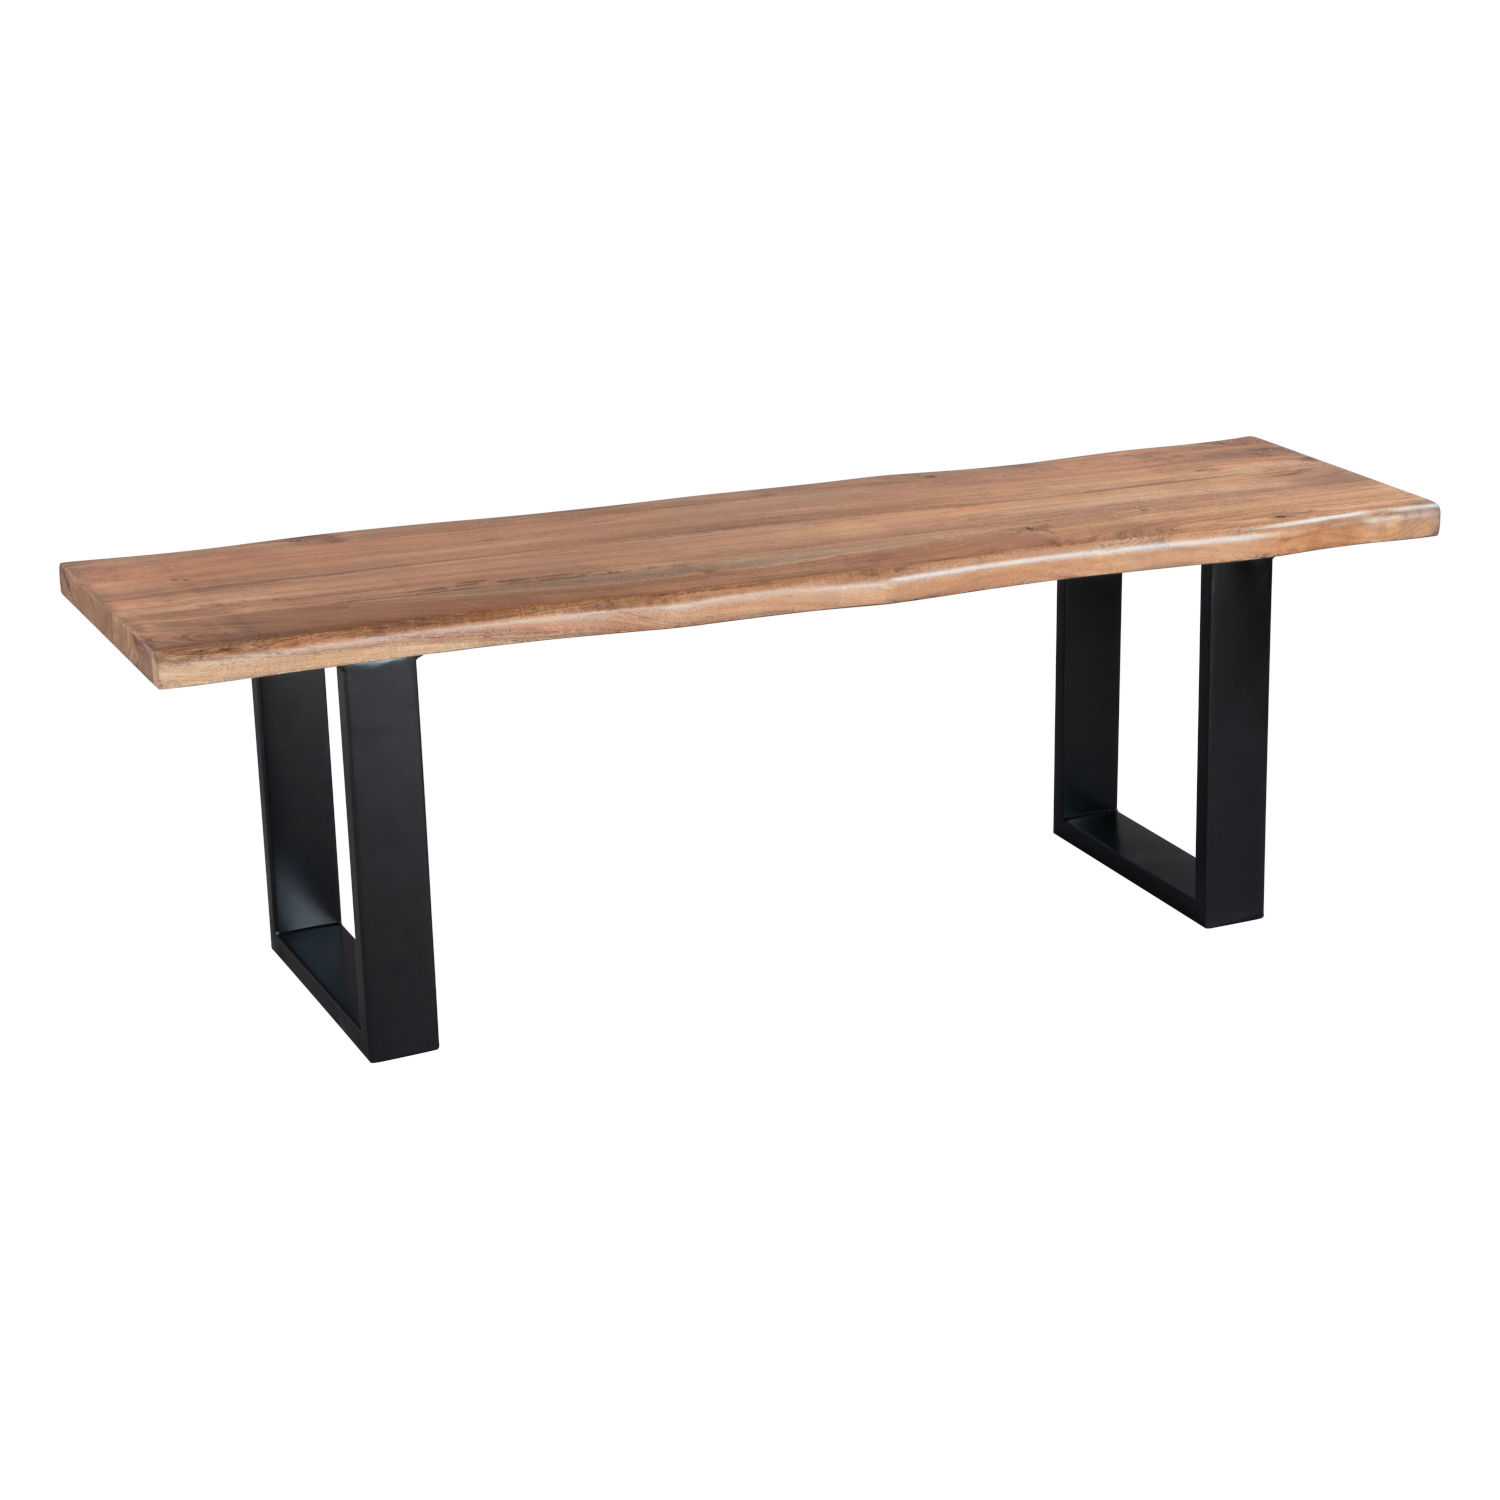 Accent & Storage Benches Category